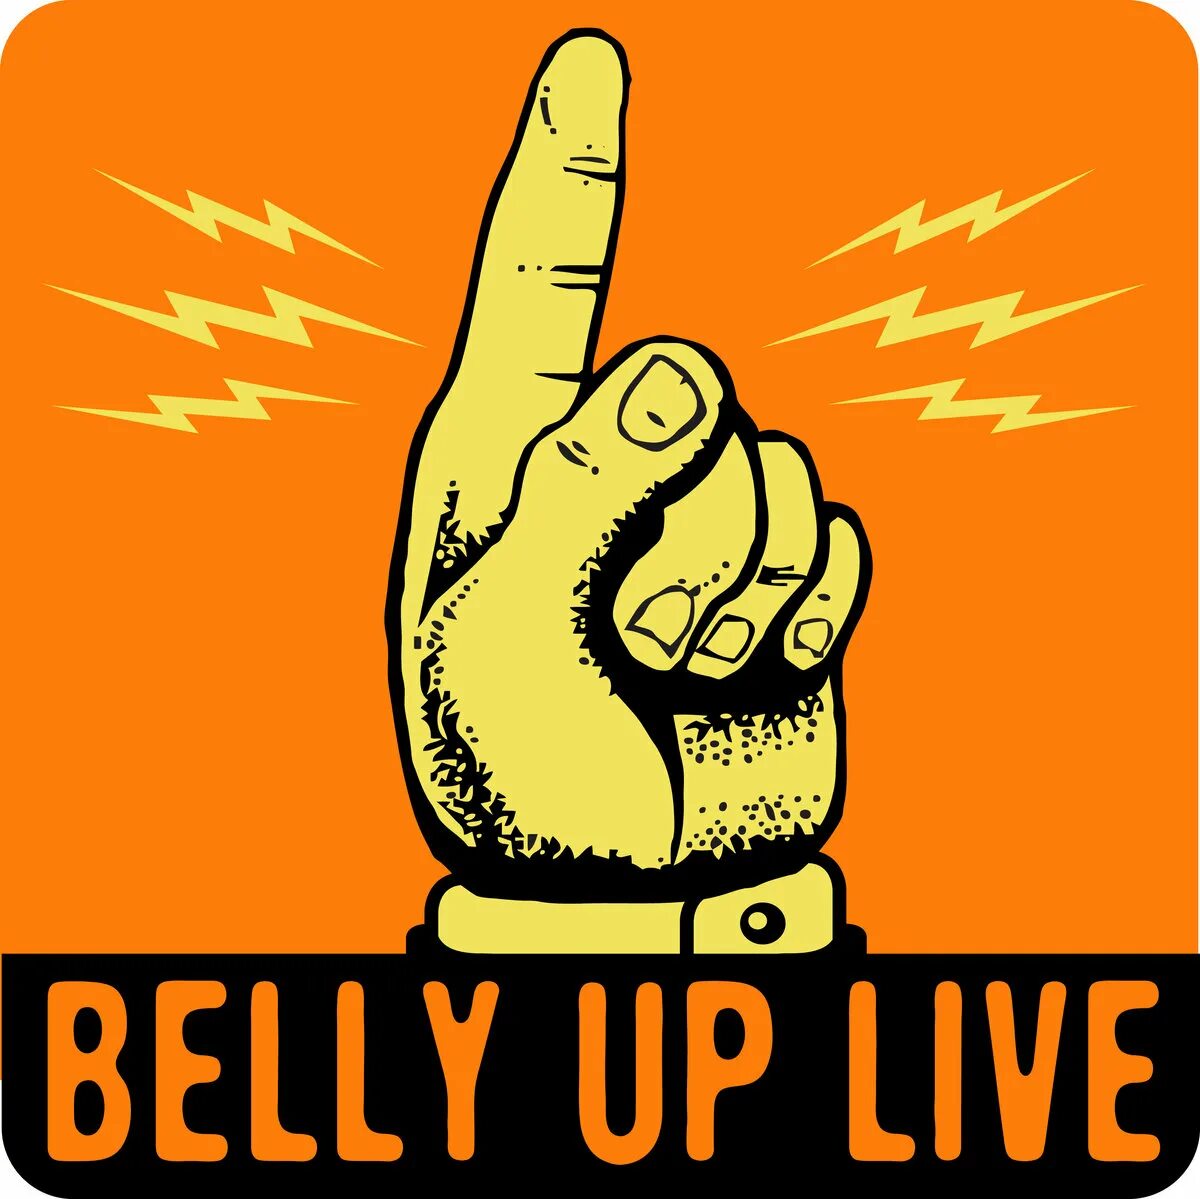 Up live home. Ап лайв. Belly up. Live up to.